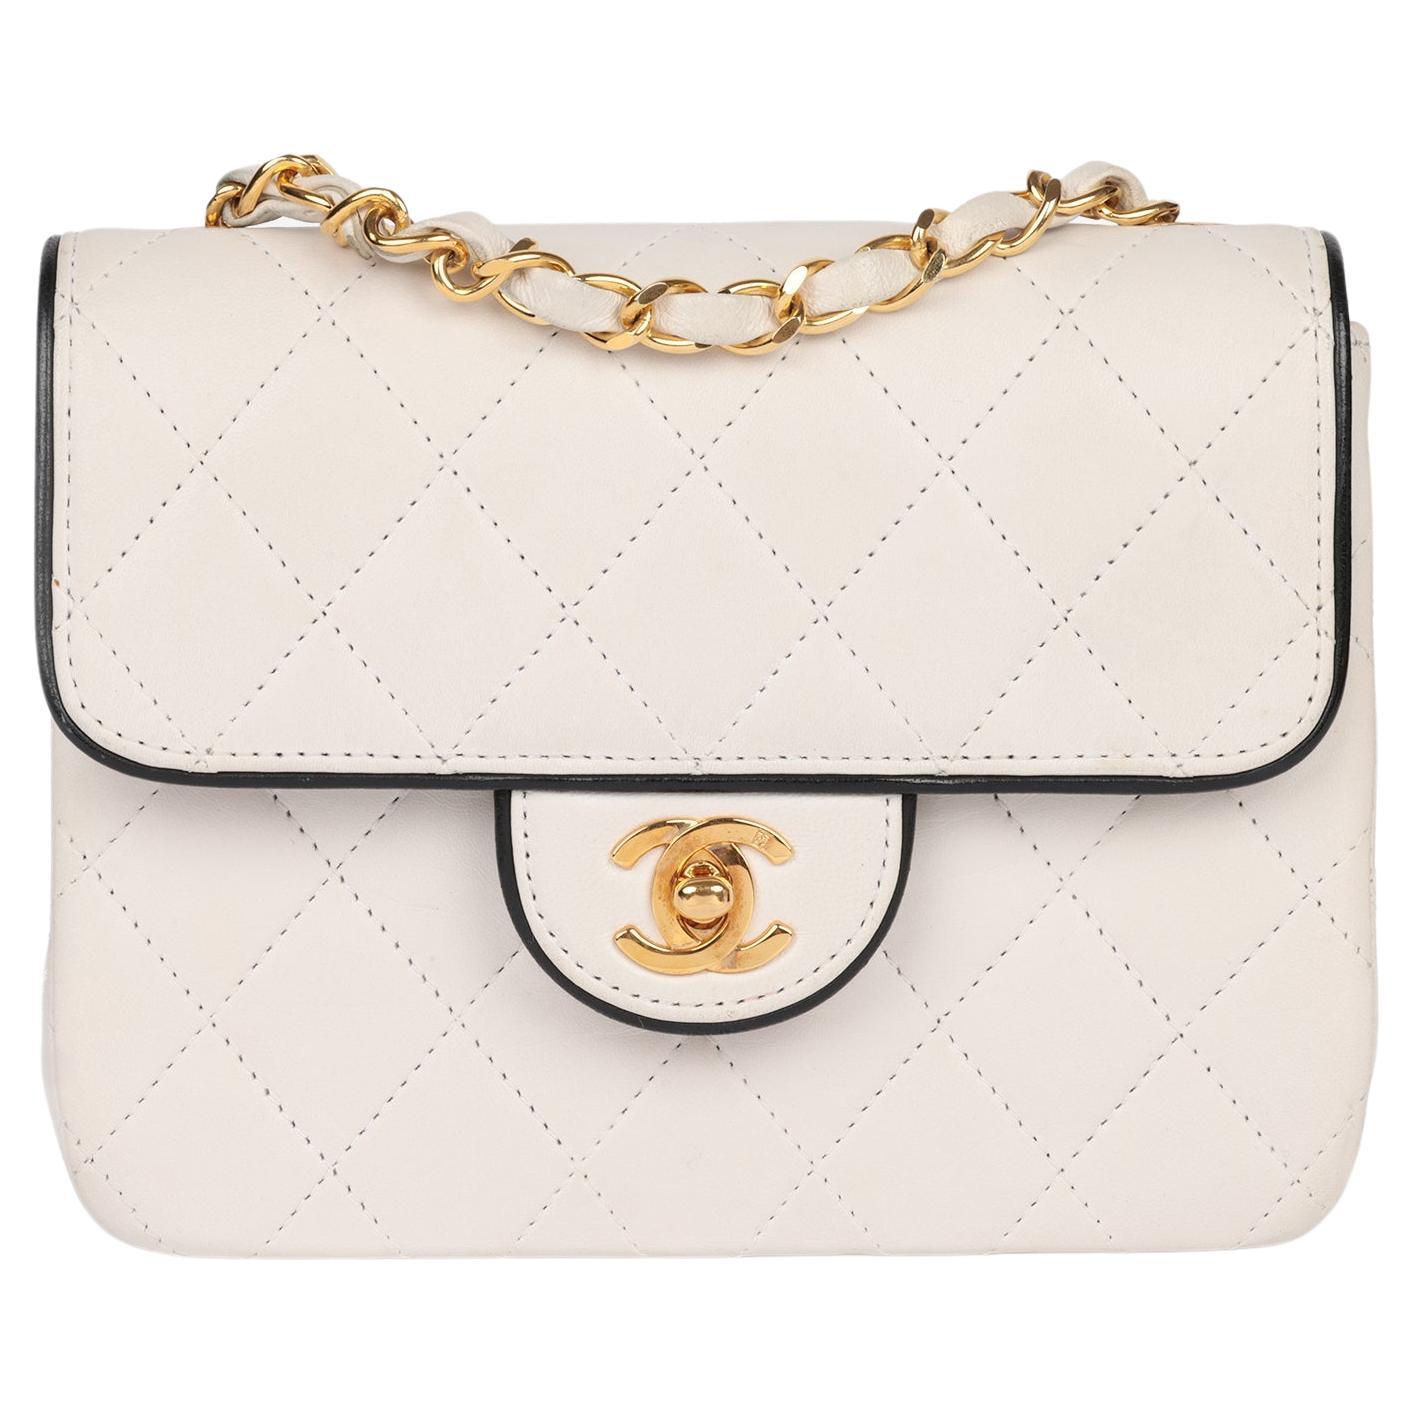 Chanel White Quilted Lambskin With Black Trim Vintage Square Mini Flap Bag